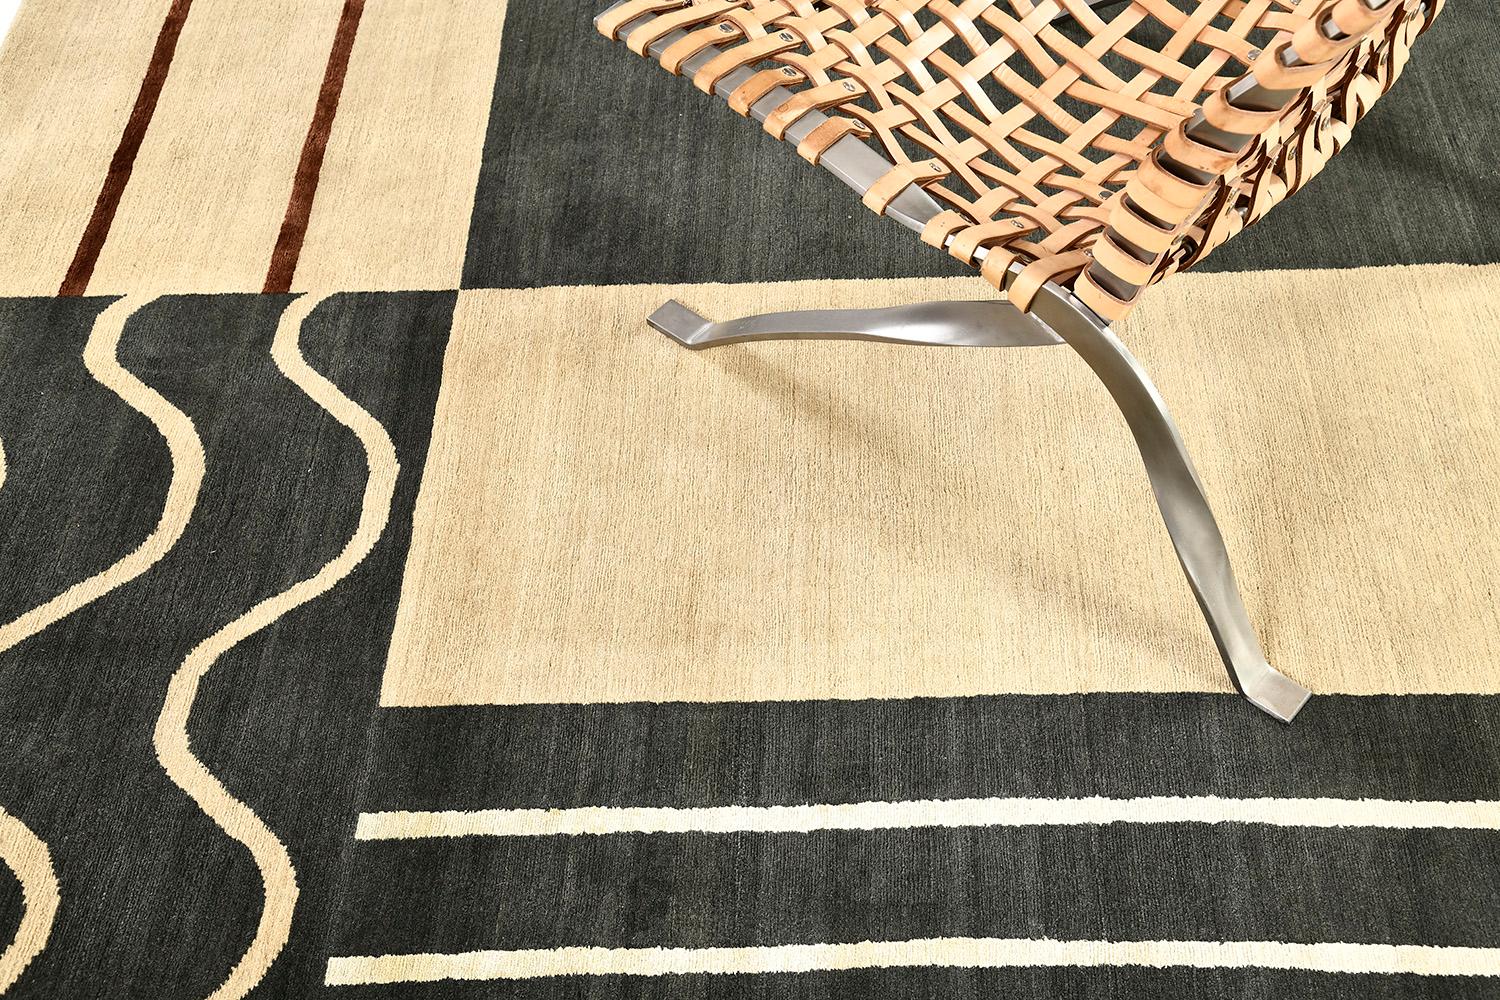 An outstanding creation of Mondrian rug that elegantly establishes exceptional intricacy through a geometric pattern connected by graceful inverted natural schemes. This contemporary rug is in the powerful tones of sand and charcoal with a red